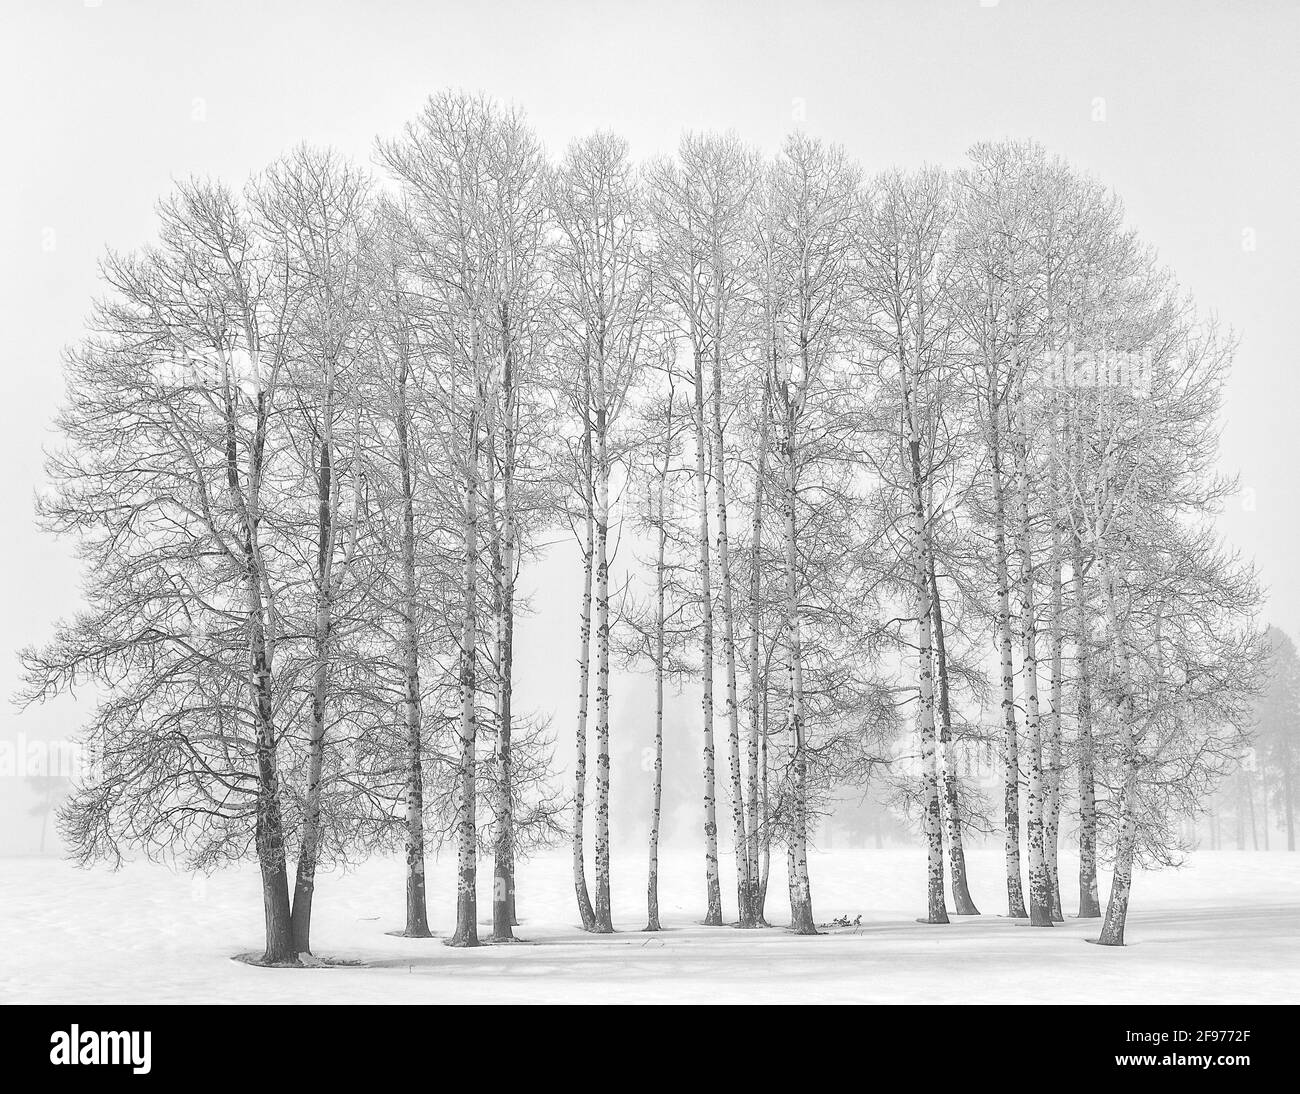 Aspen trees with fog and winter snow; Crater Lake Highway near Fort Klamath, Oregon. Stock Photo